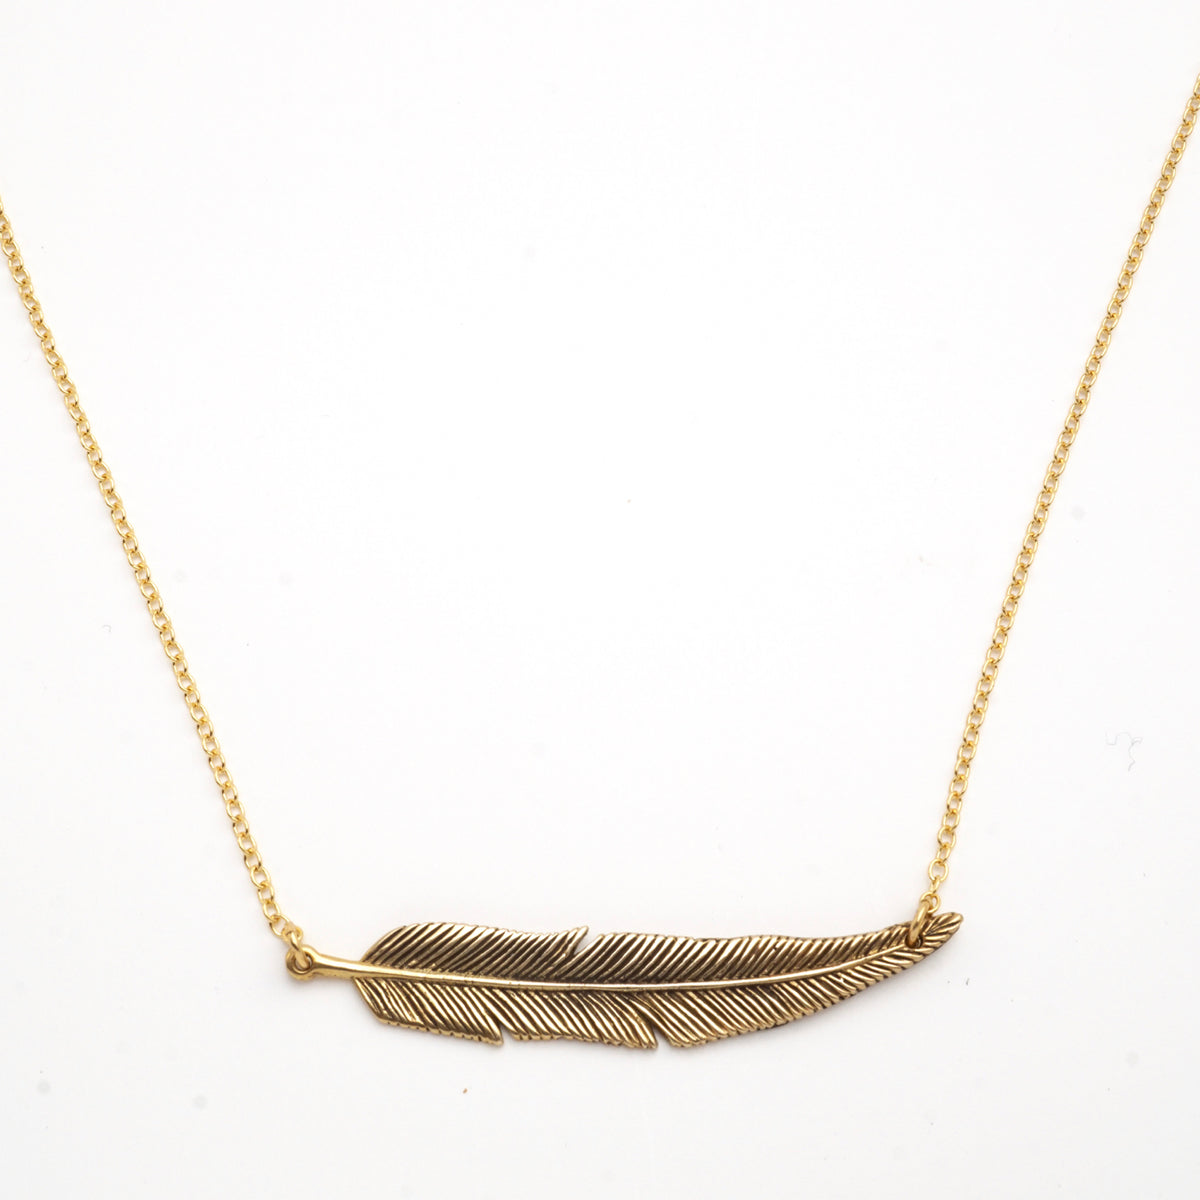 Feather Bar Necklace - Layering Necklace - 14K Gold Filled Chain